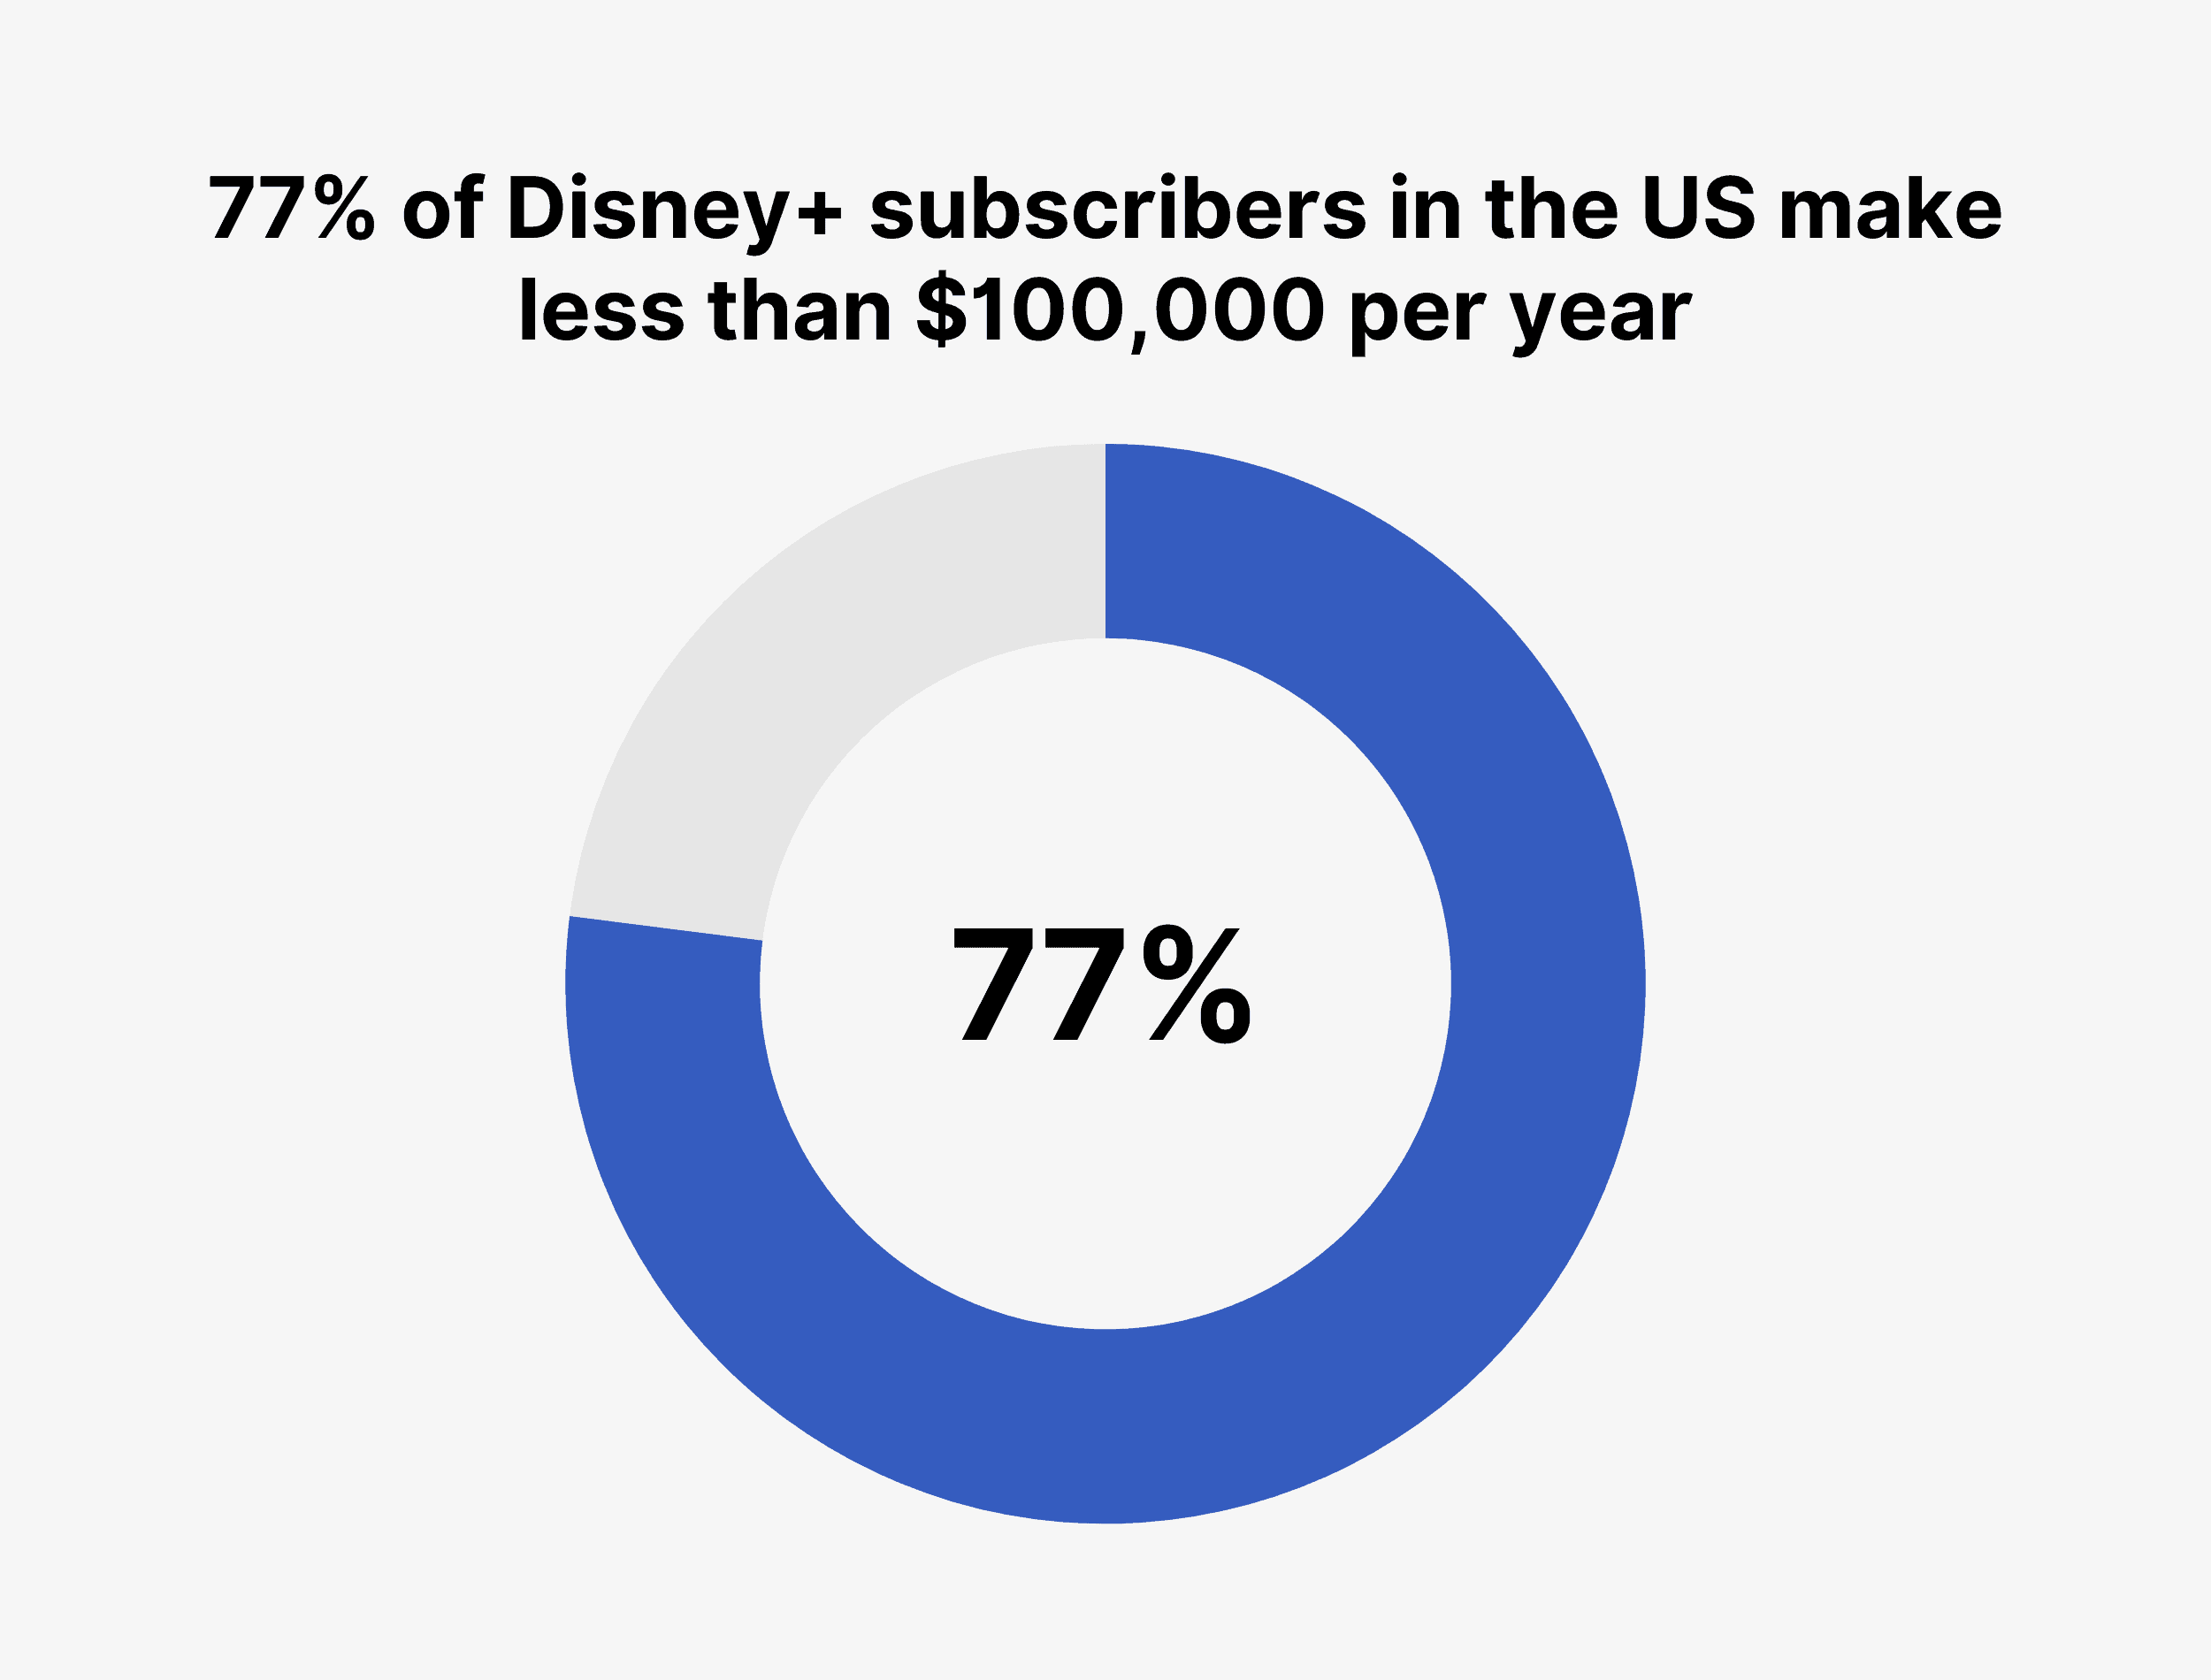 77% of Disney+ subscribers in the US make less than $100,000 per year